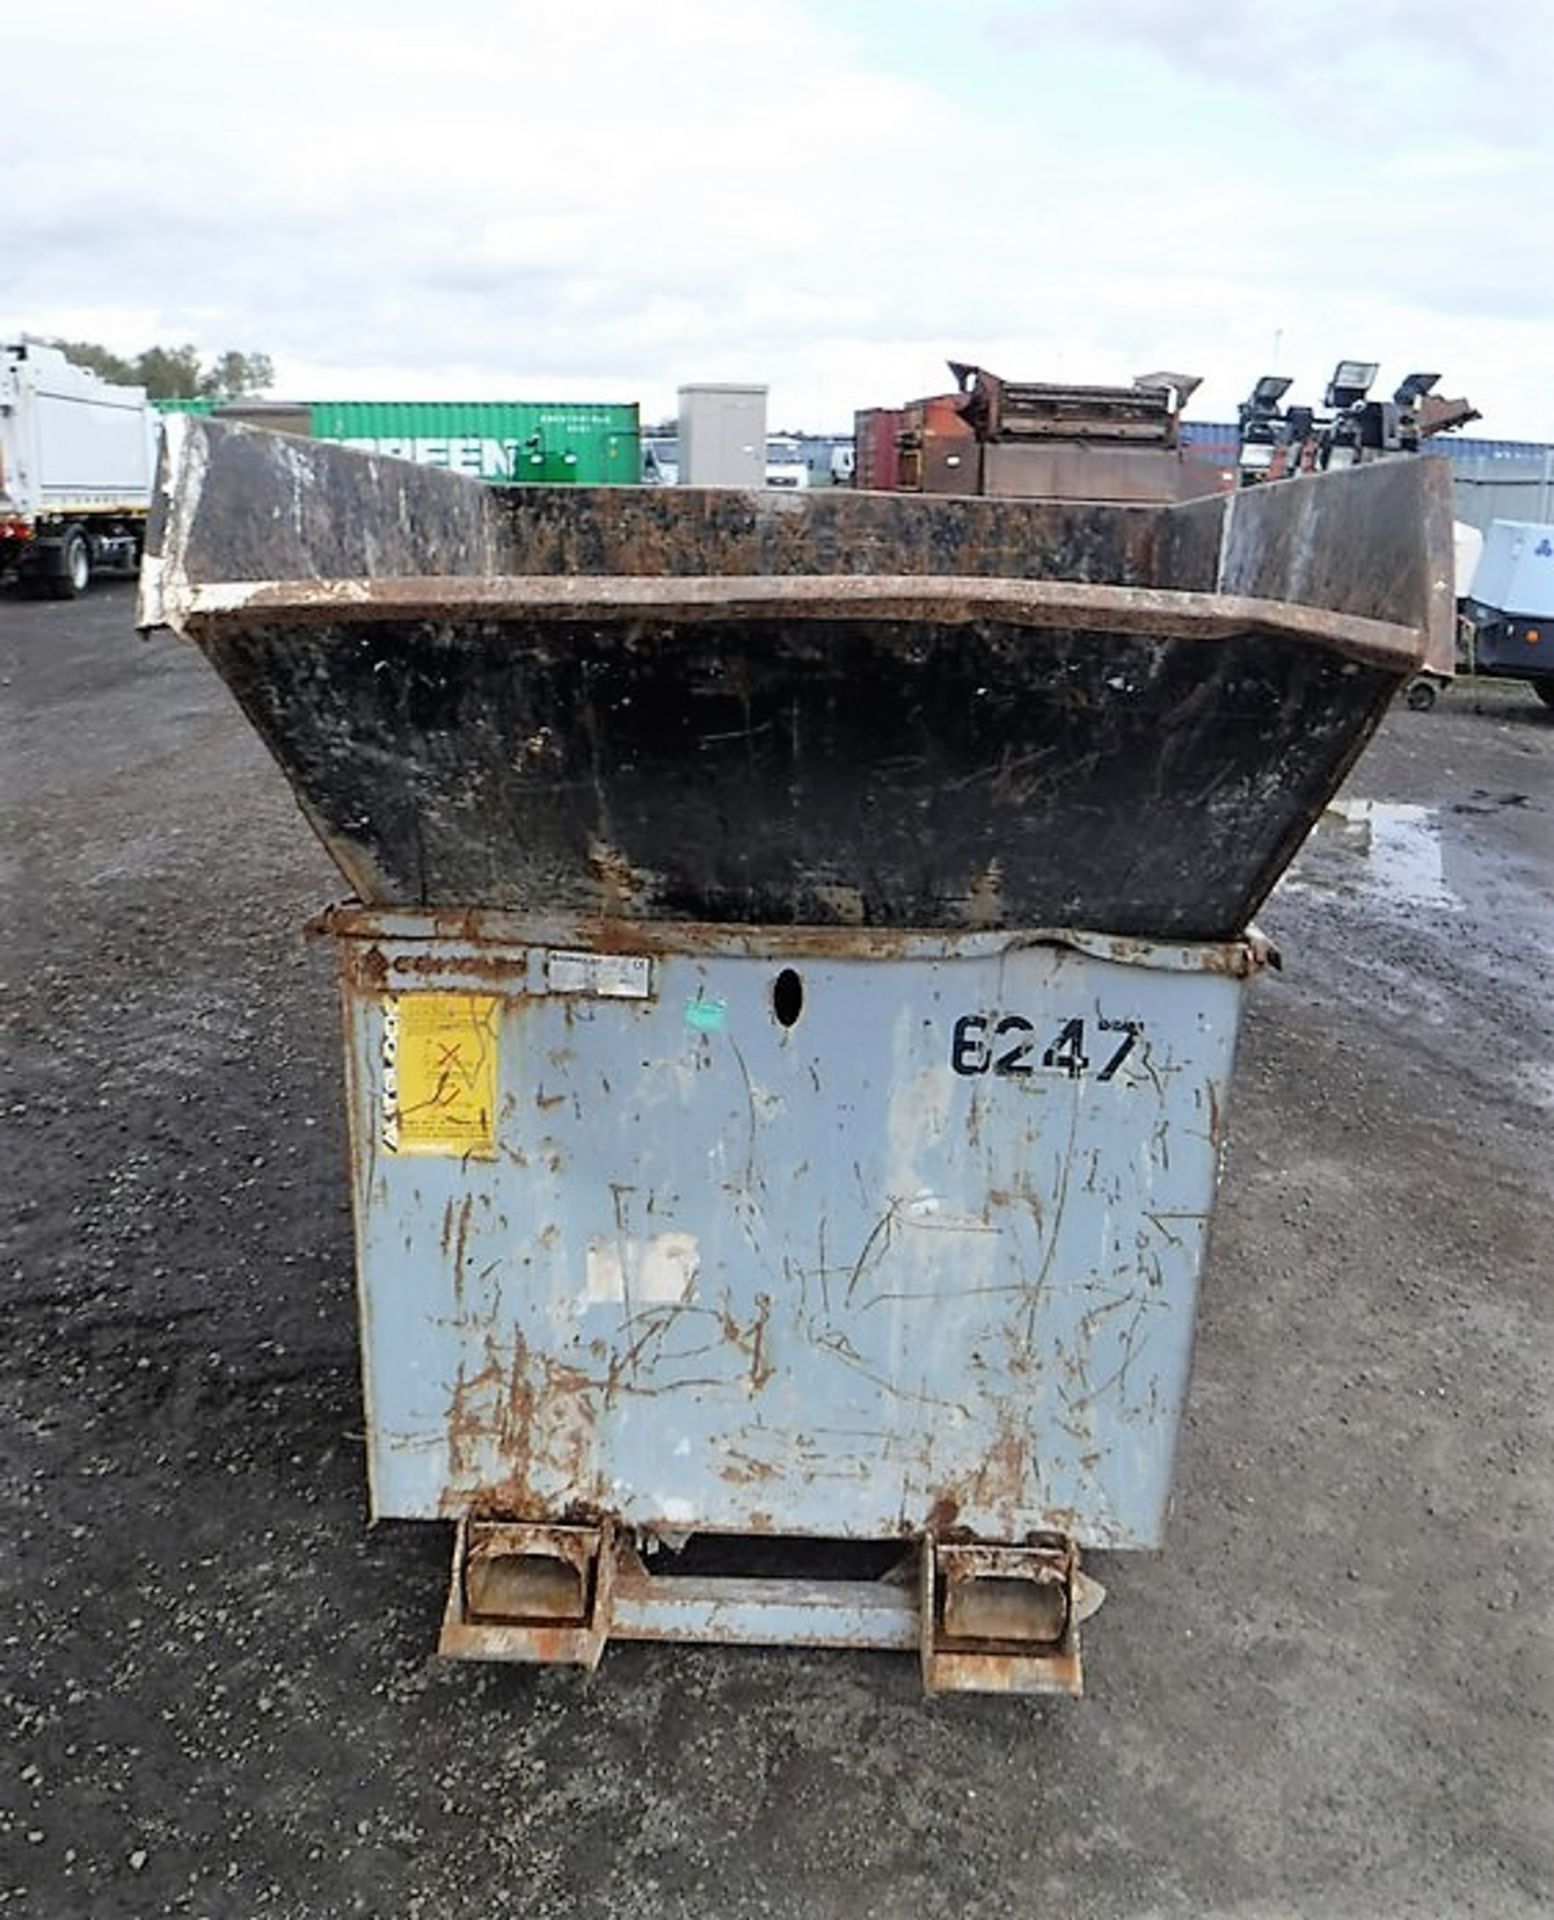 2016 CONQUIP 1200ltr tipping skips x 2 S/N CQ52900 & CQ52909. Asset nos 6247 & 6255 - Image 2 of 6